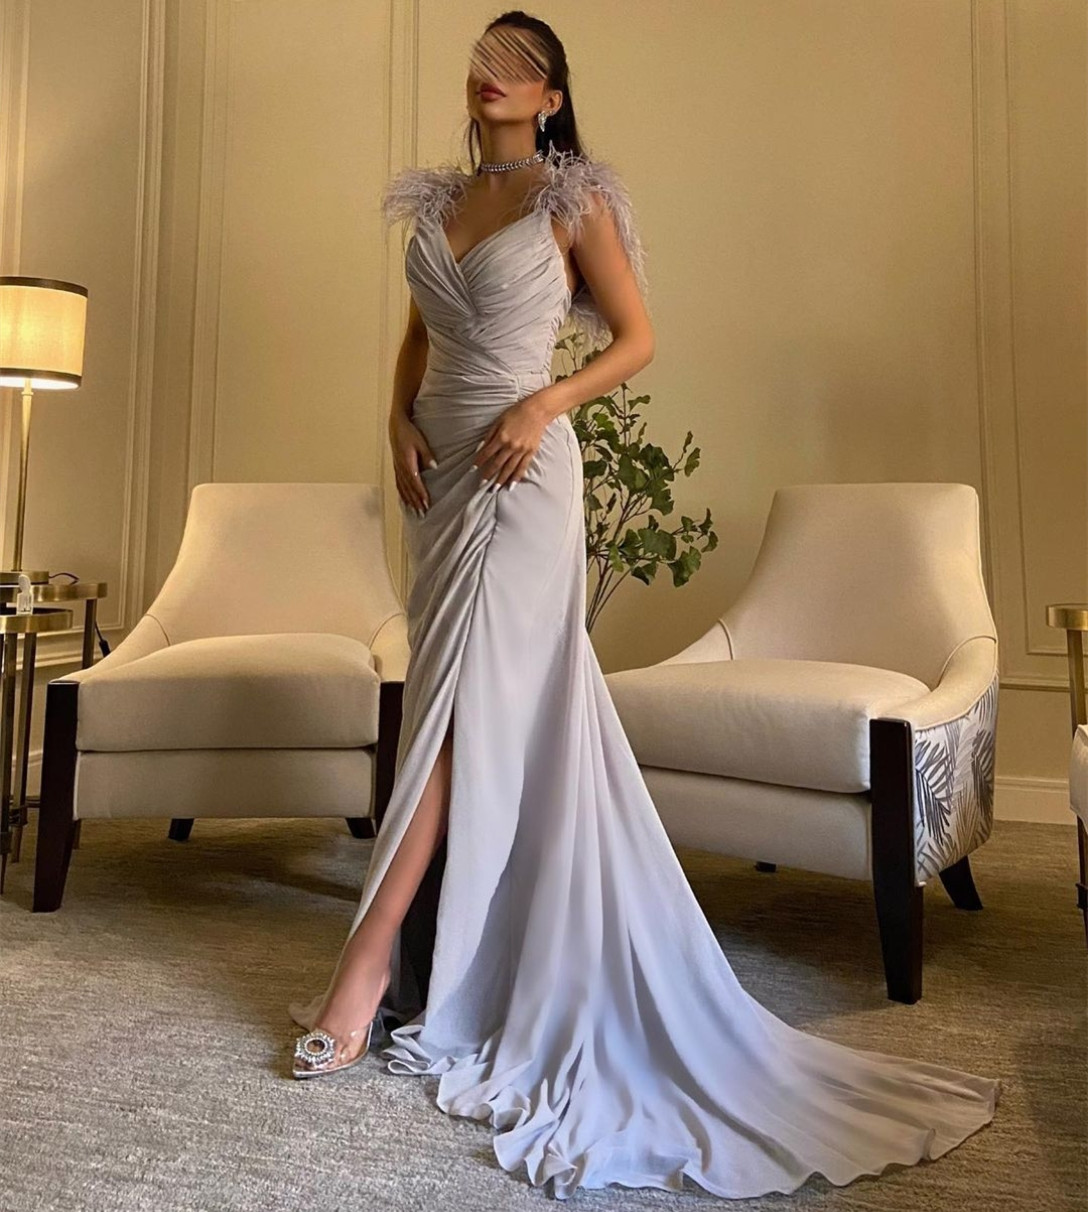 Elegant Long Gray Chiffon Evening Dresses With Slit/Feathers A-Line Sleeveless Zipper Back Sweep Train Pleated Prom Dresses Robe De Soiree Formal Party Gown for Women